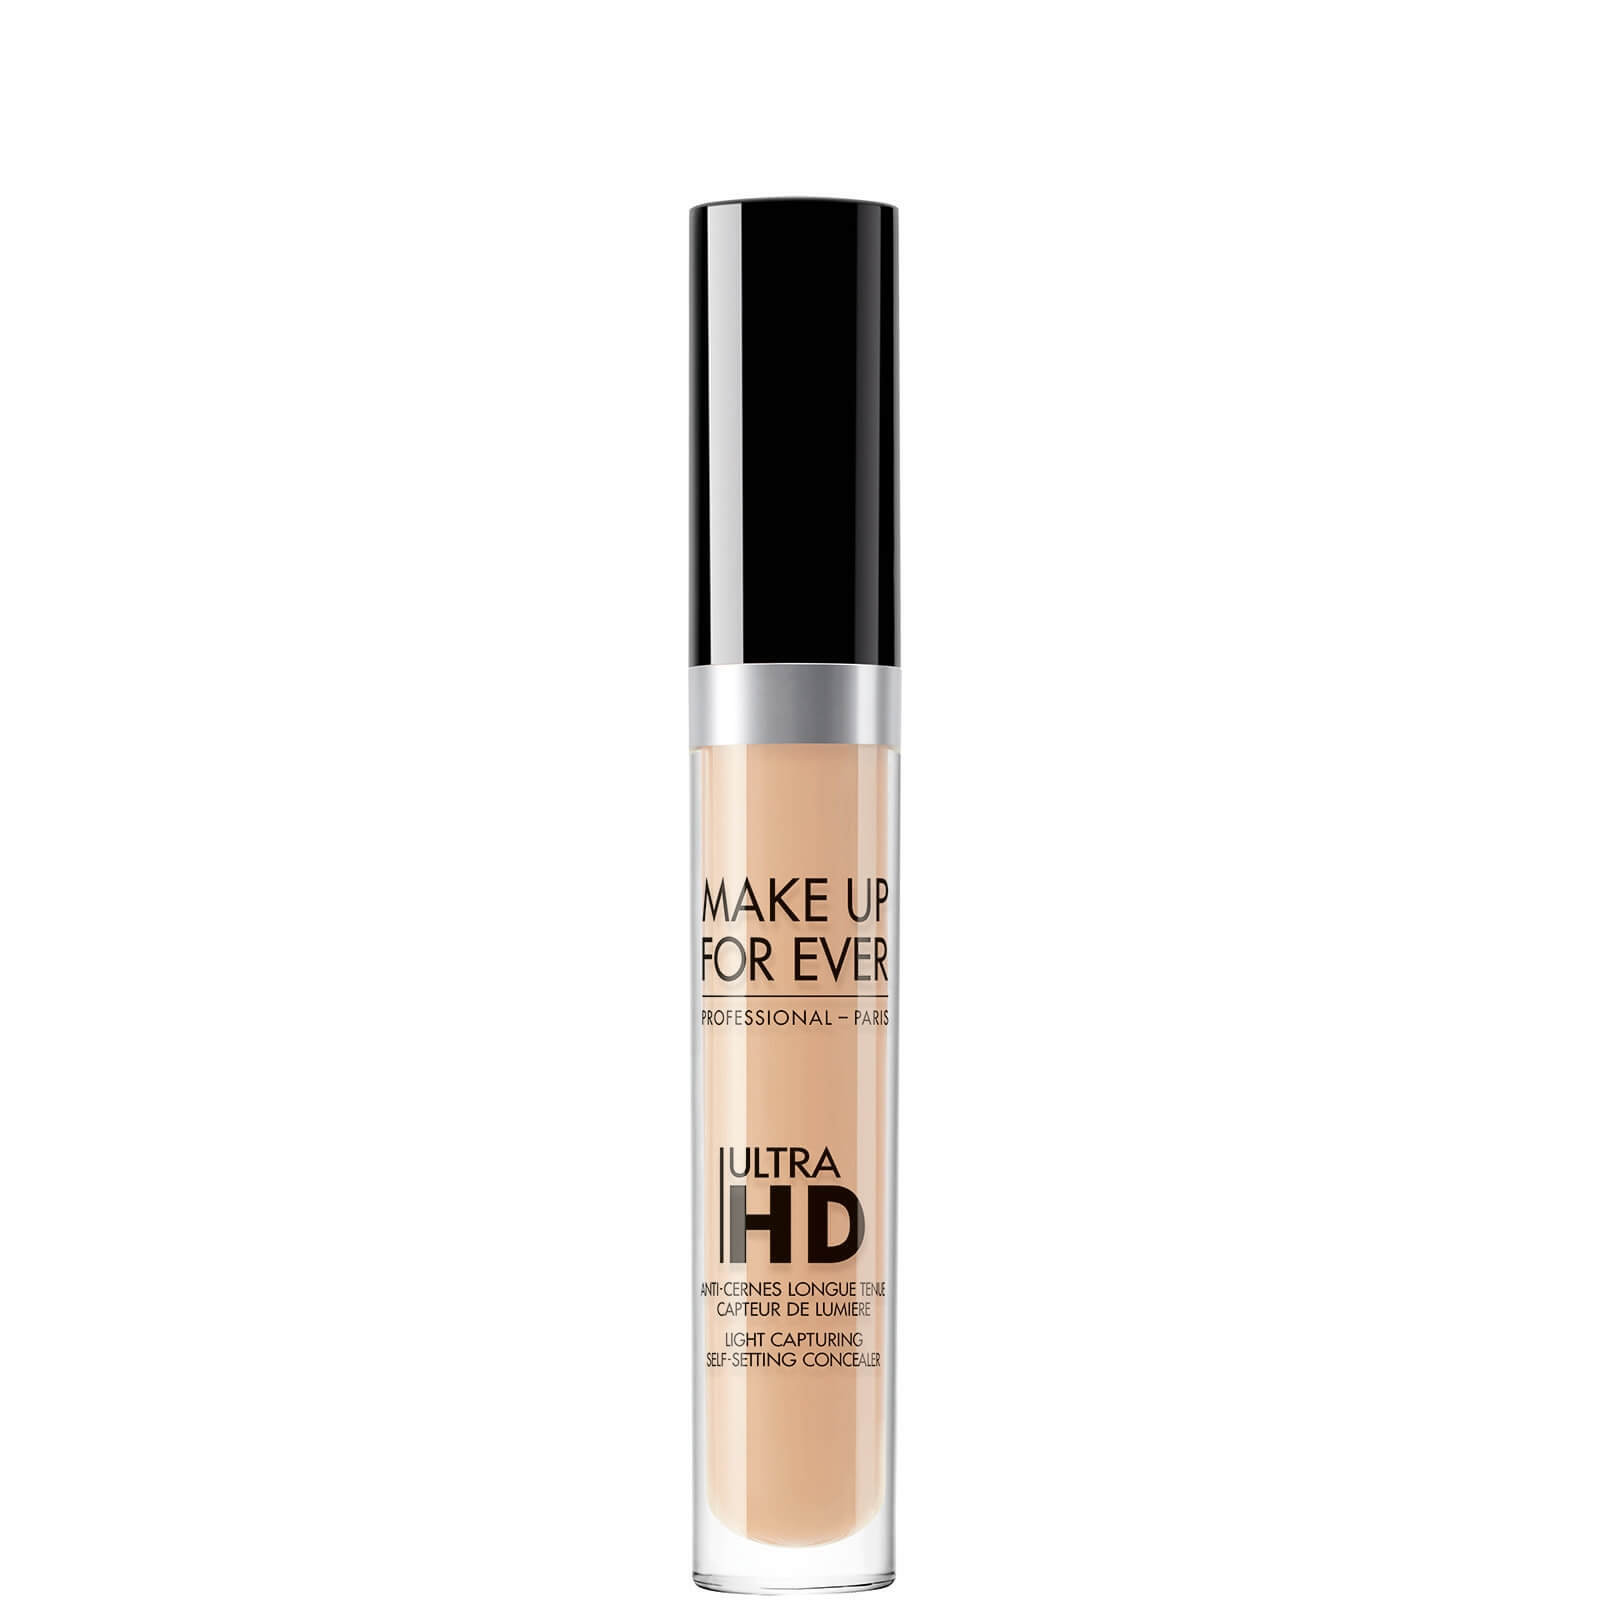 MAKE UP FOR EVER ultra Hd Self-Setting Concealer 5ml (Various Shades) - - 22-Sand Beige